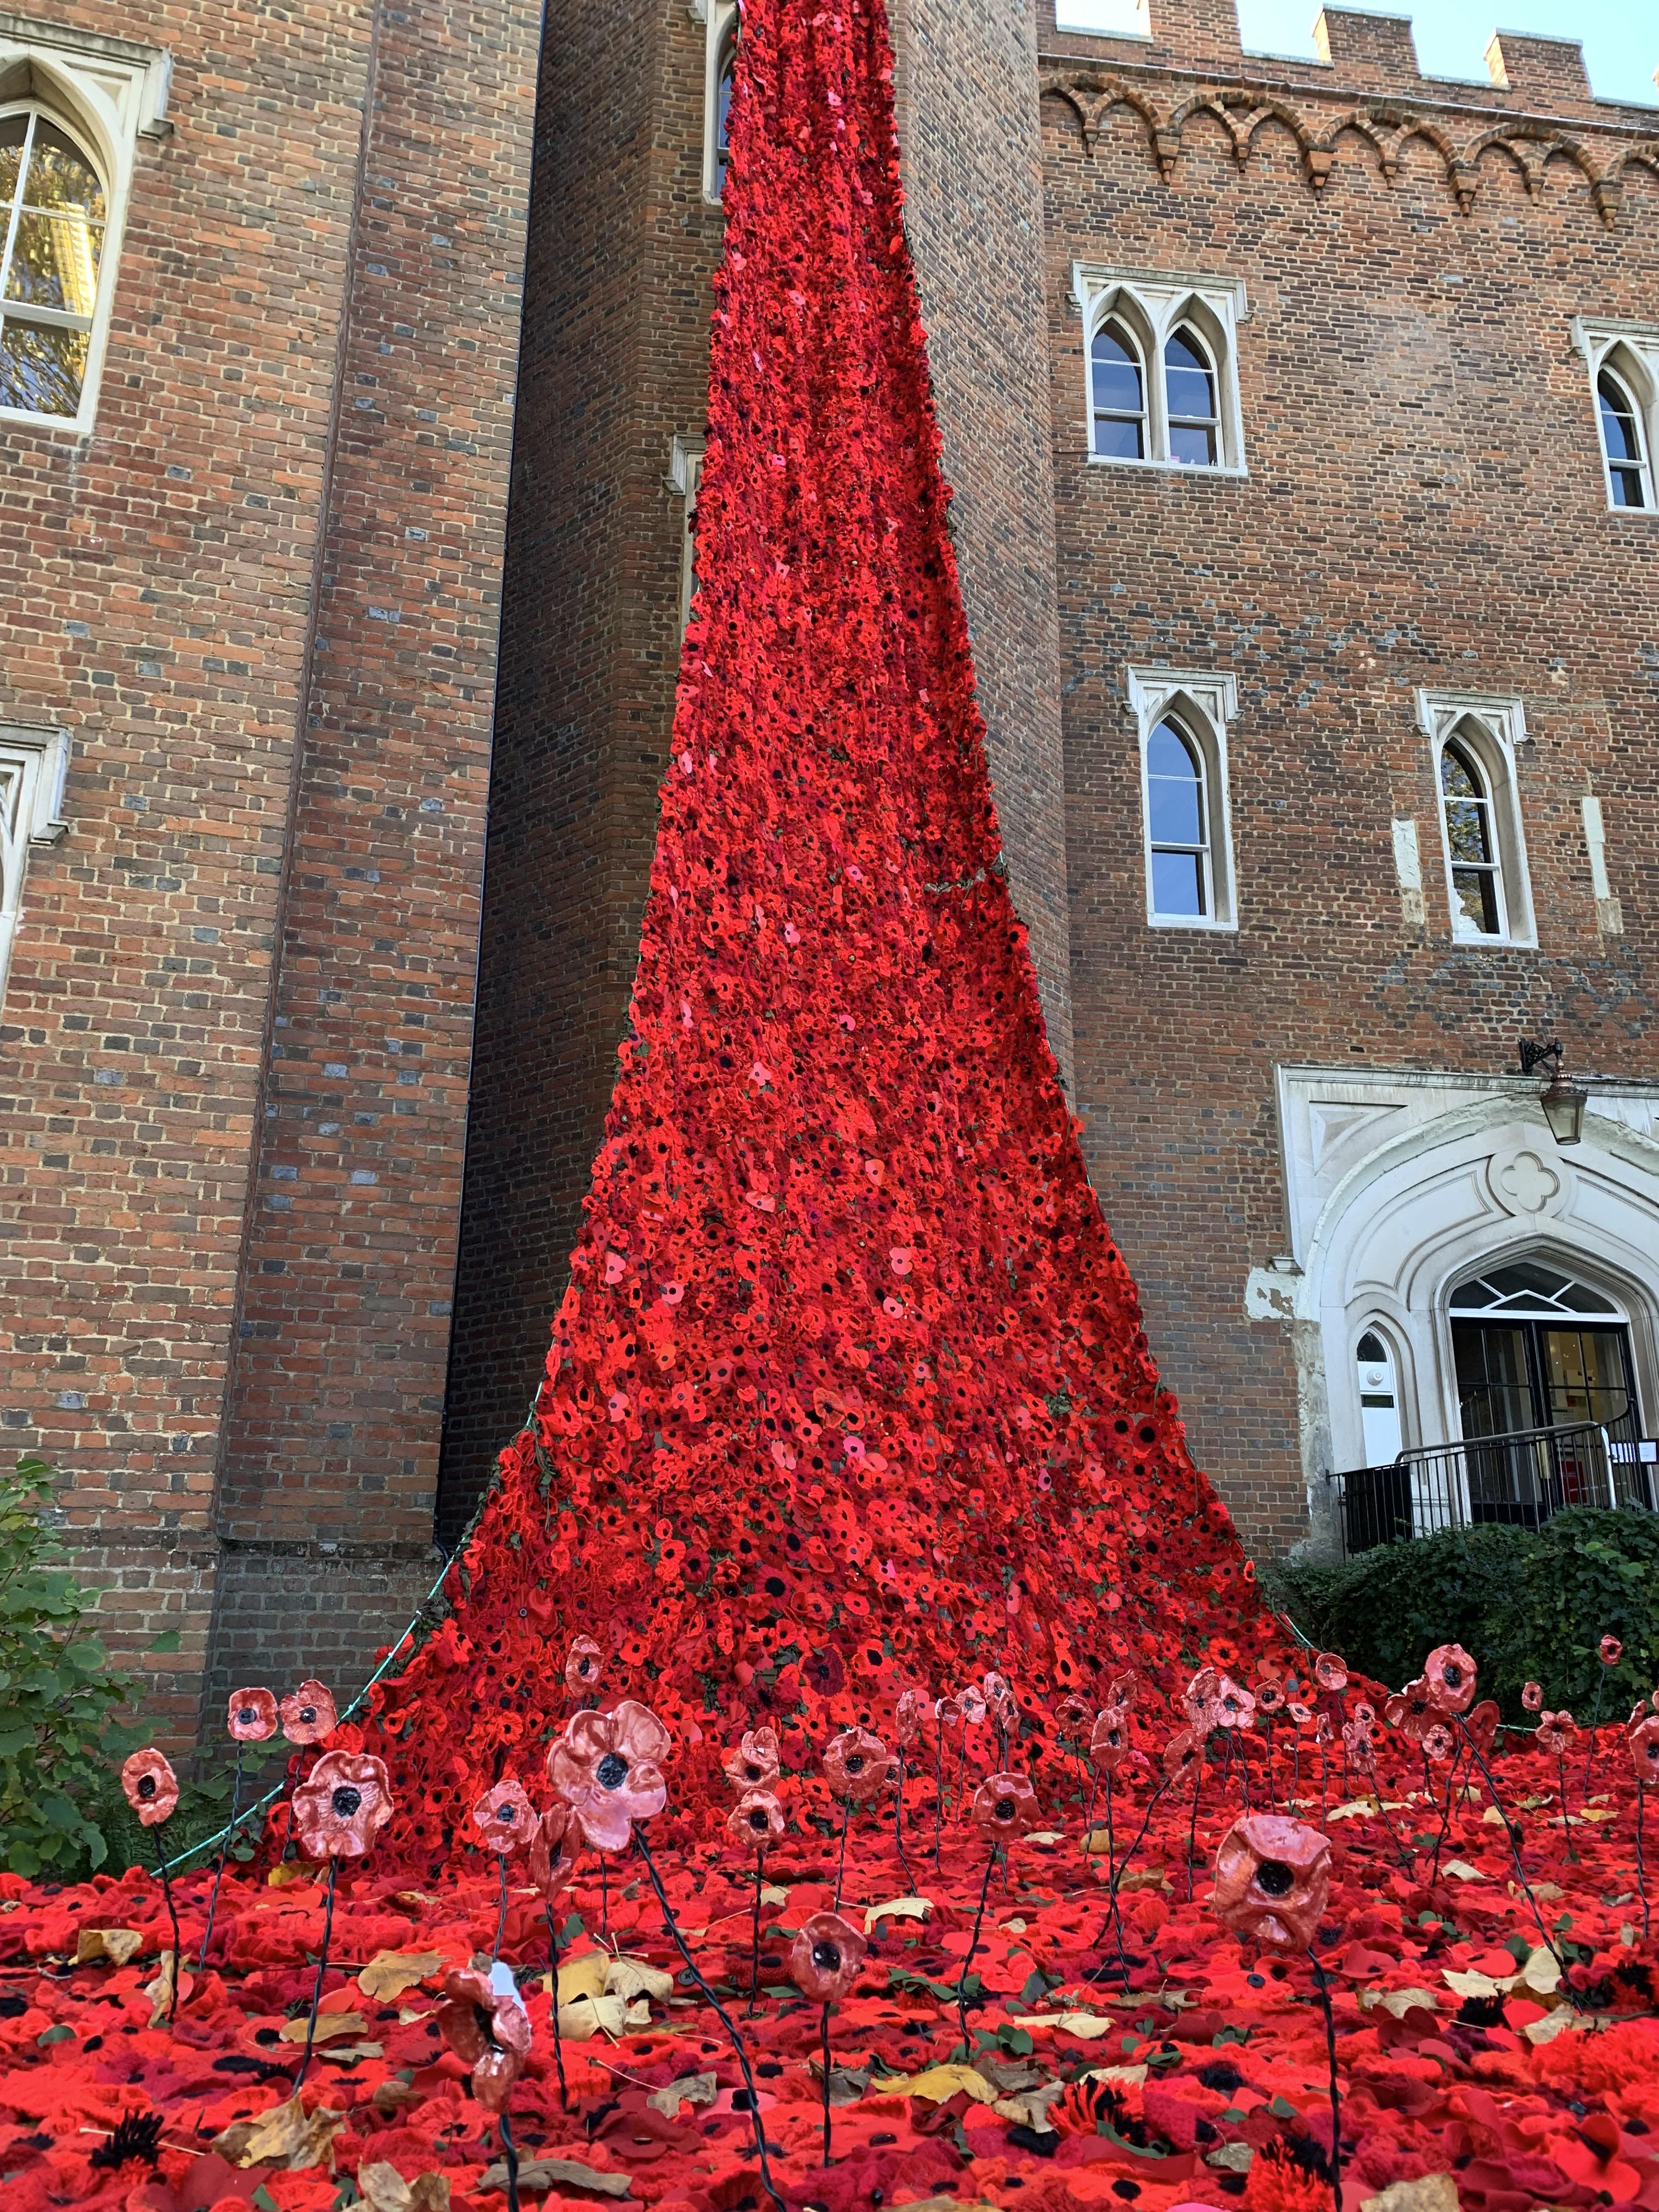 In memory of those who lost their lives in WW1.